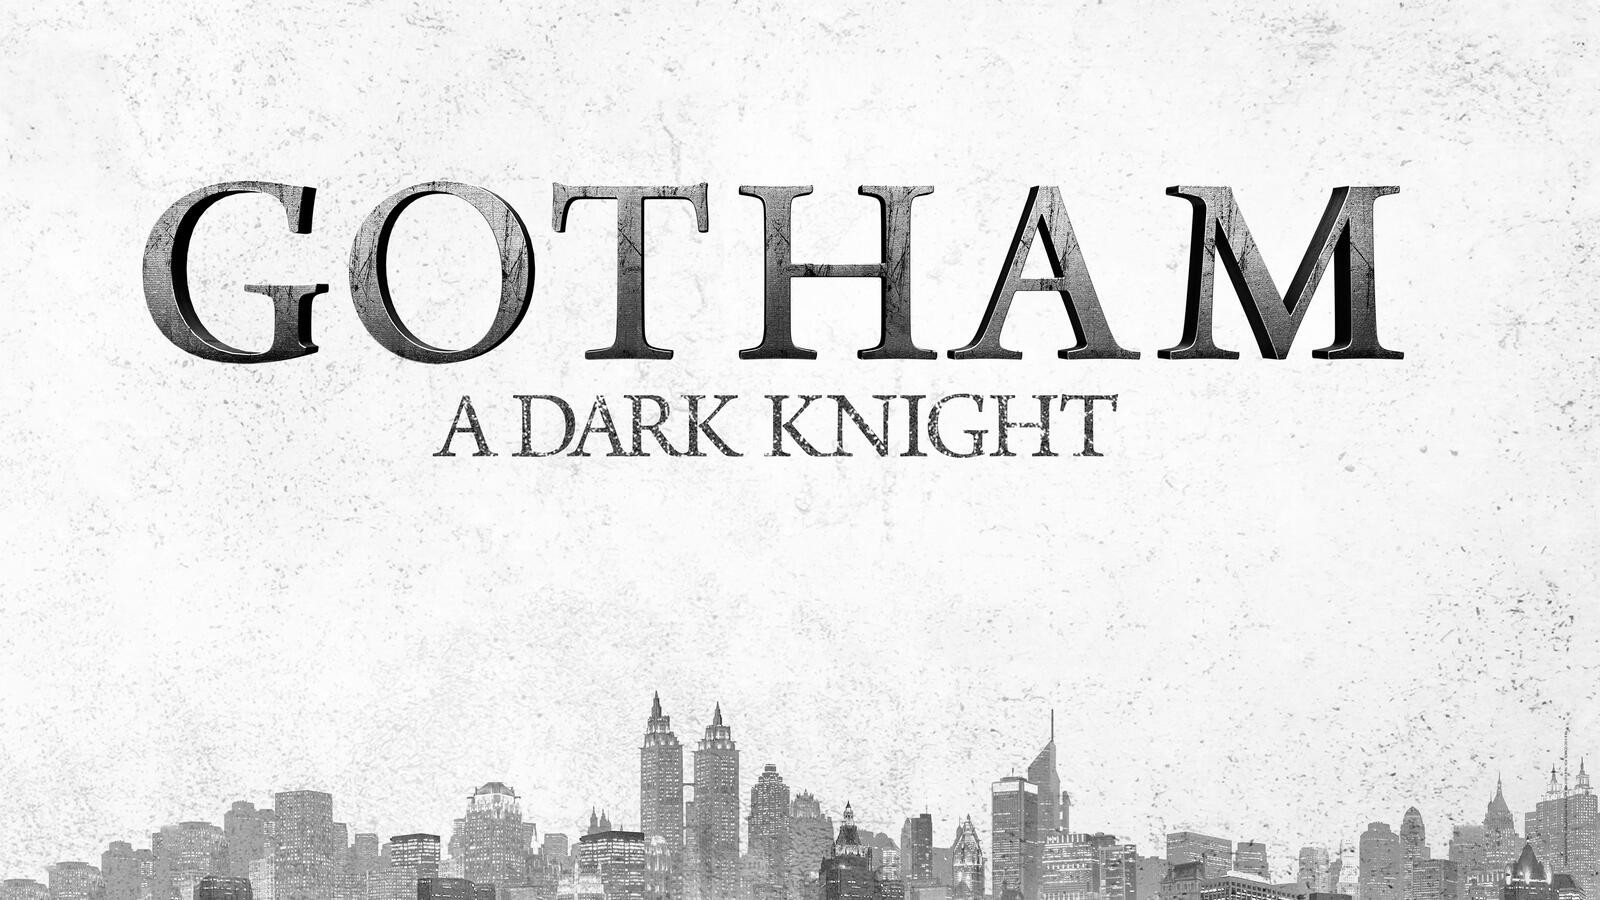 Wallpapers TV show gotham text on the desktop